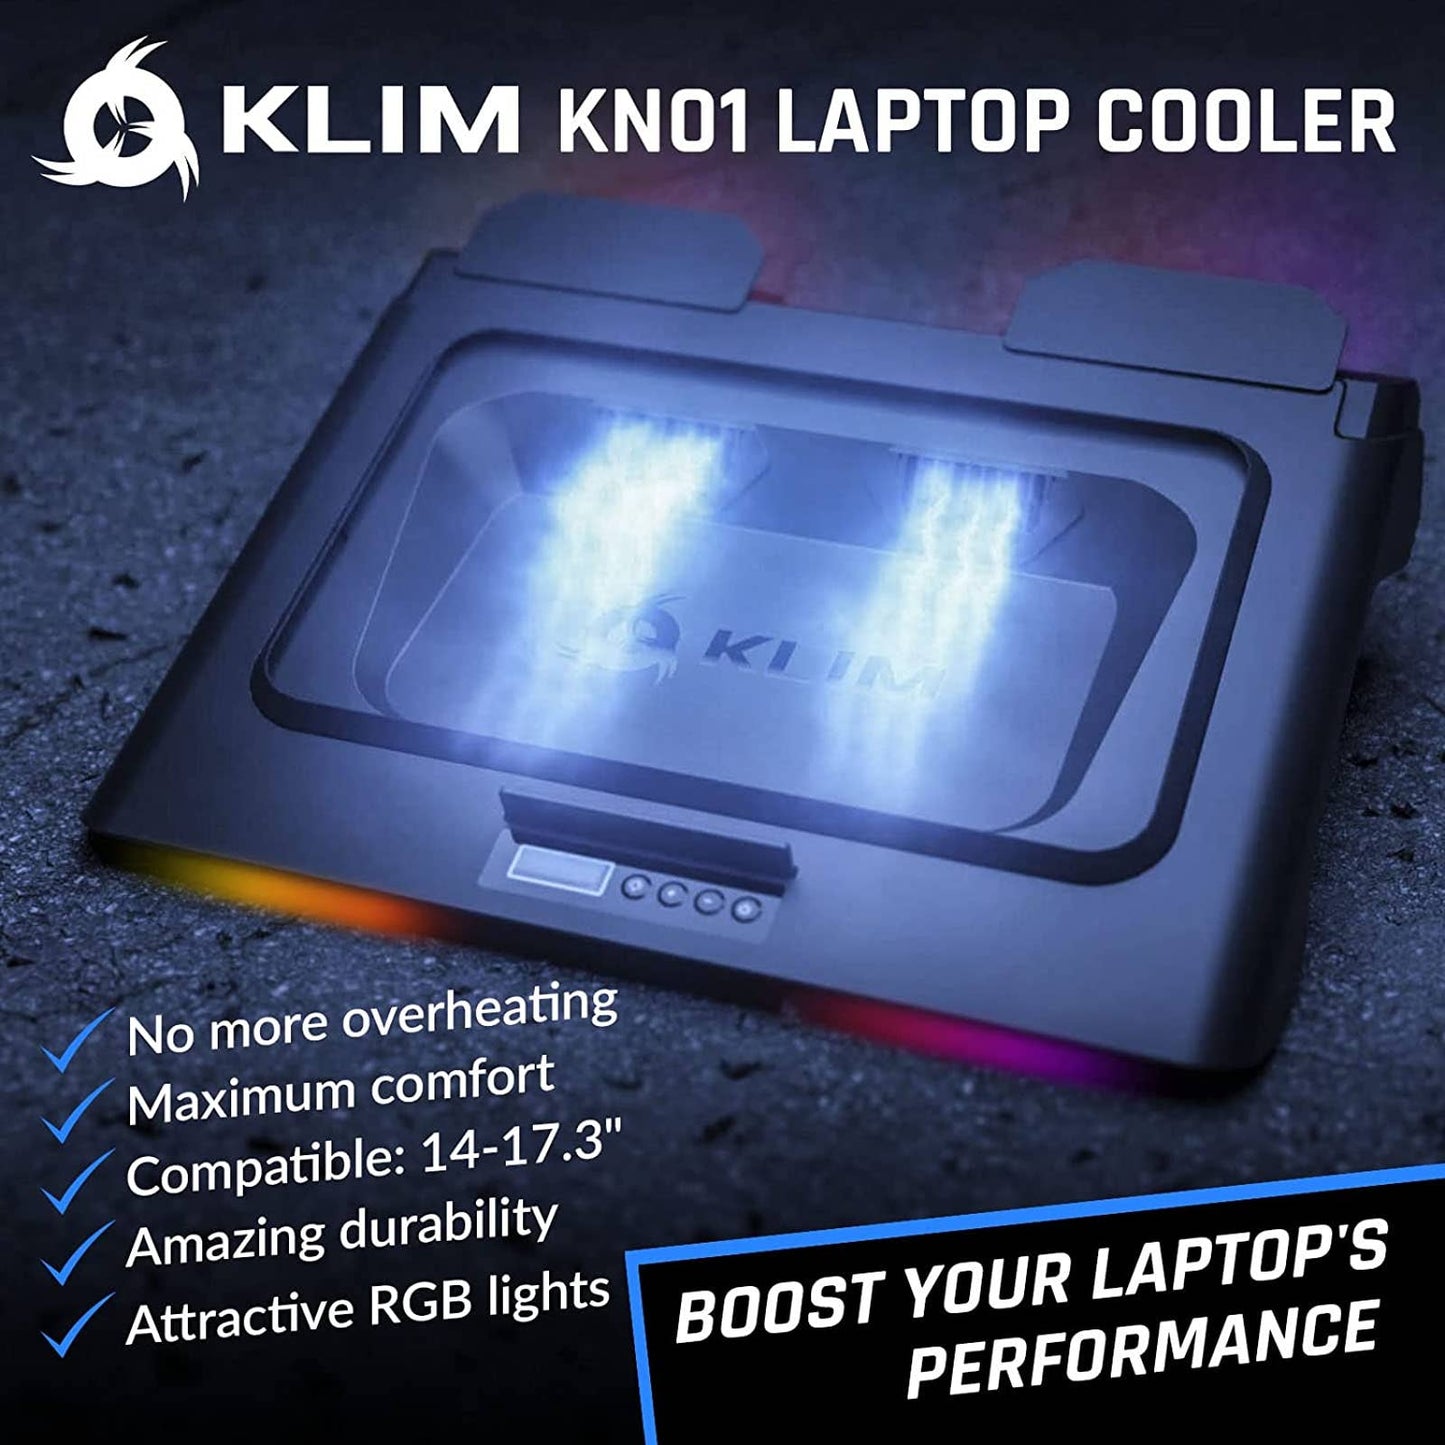 Laptop Cooling Pad - I personally use This and LOVE IT